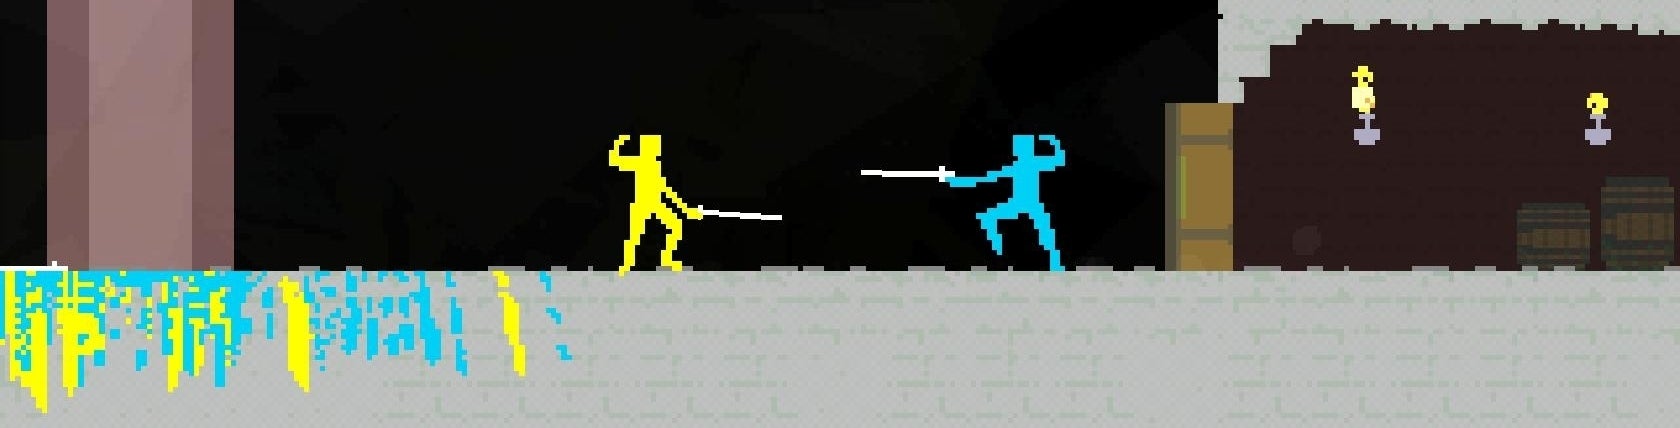 Image for Nidhogg review